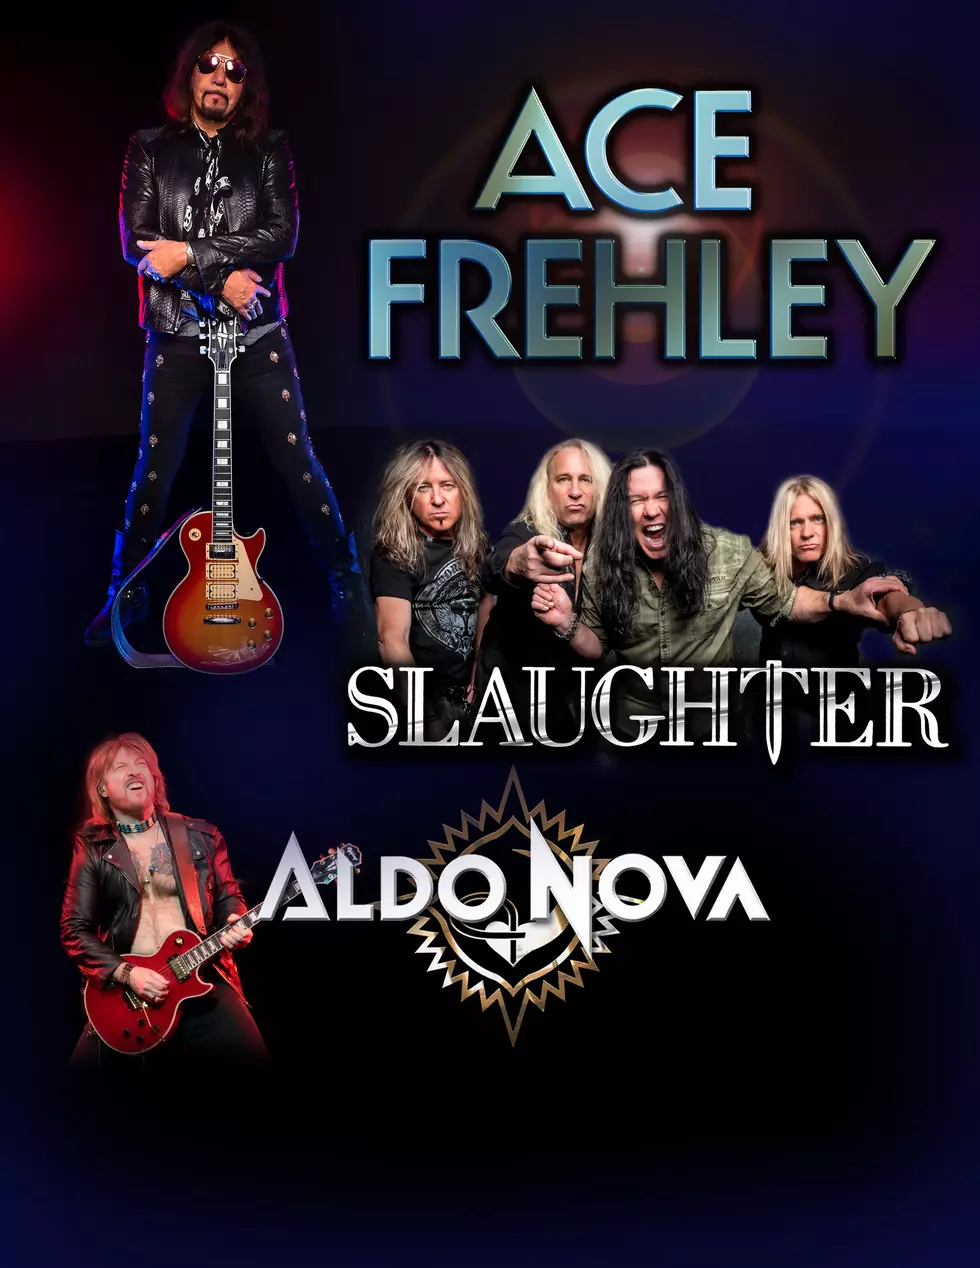 Enter to Win a Pair of Tickets to Ace Frehley at Mohegan Sun May 26